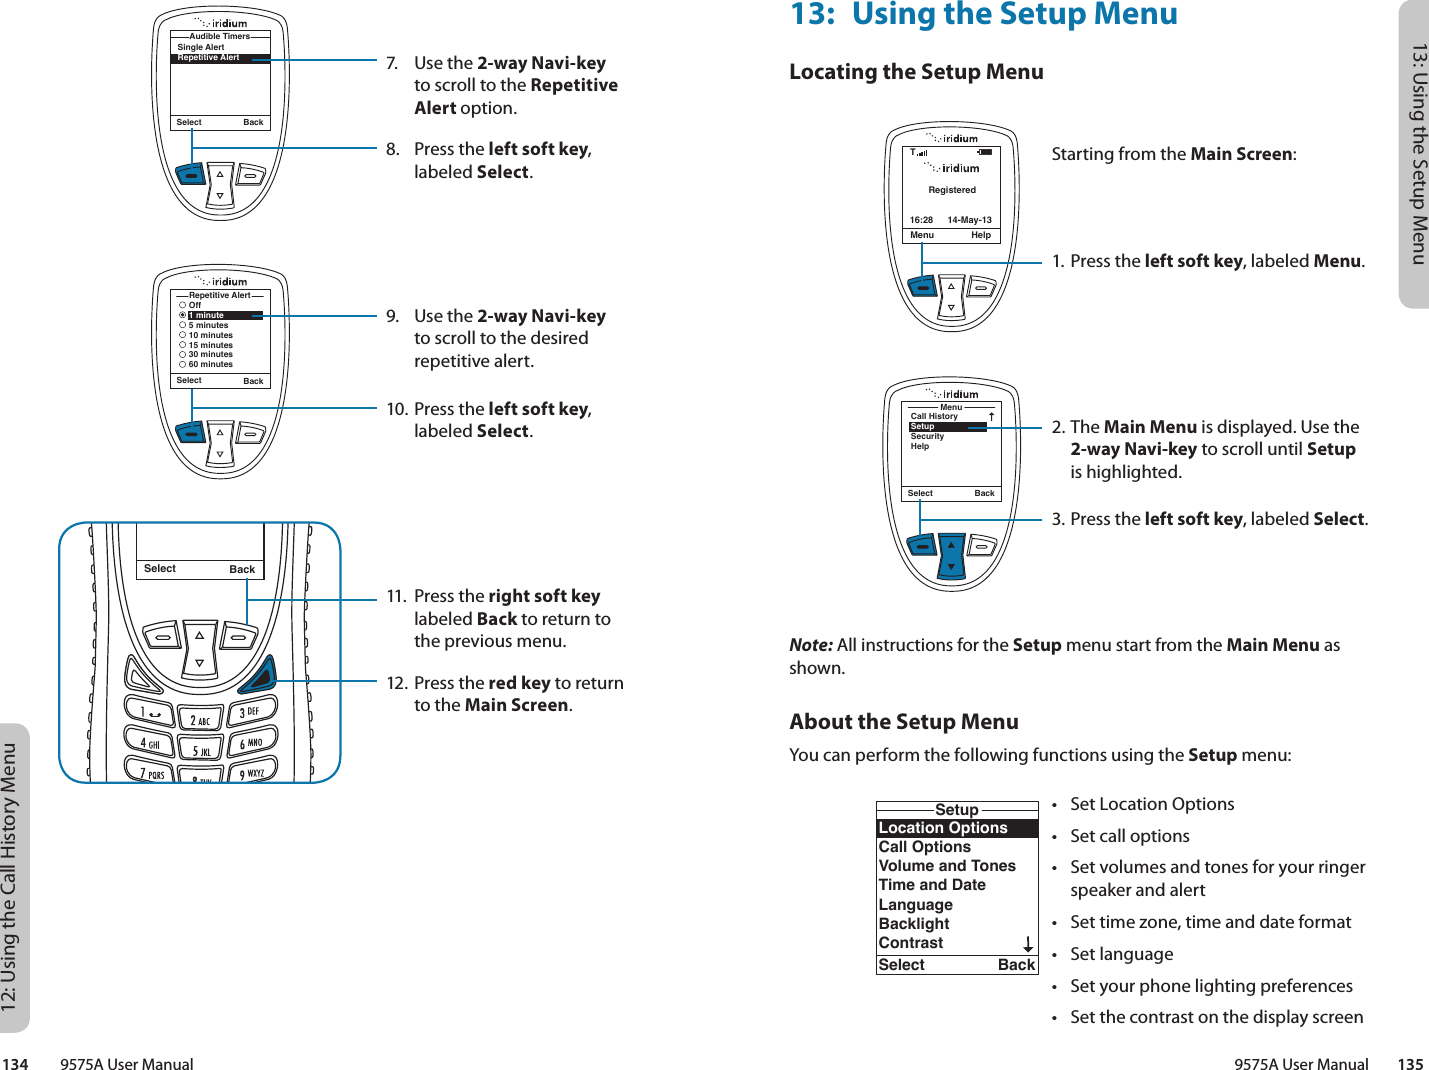 13: Using the Setup Menu9575A User Manual        13512: Using the Call History Menu134         9575A User Manual7.  Use the 2-way Navi-key to scroll to the Repetitive Alert option.8.  Press the left soft key, labeled Select.9.  Use the 2-way Navi-key to scroll to the desired repetitive alert.10. Press the left soft key, labeled Select.11.  Press the right soft key labeled Back to return to the previous menu.12. Press the red key to return to the Main Screen.Select BackMessage DeletedMessageSelect BackSingle AlertRepetitive AlertAudible TimersRepetitive AlertOff1 minute5 minutes10 minutes15 minutes30 minutes60 minutesSelect Back13:  Using the Setup MenuLocating the Setup MenuNote: All instructions for the Setup menu start from the Main Menu as shown.About the Setup MenuYou can perform the following functions using the Setup menu:RegisteredMenu Help16:28 14-May-13TStarting from the Main Screen:1. Press the left soft key, labeled Menu.2. The Main Menu is displayed. Use the 2-way Navi-key to scroll until Setup is highlighted.3.  Press the left soft key, labeled Select.MenuCall HistorySetupSecurityHelpSelect BackLocation OptionsCall OptionsVolume and TonesTime and DateLanguageBacklightContrastSetupSelect BackKey SetupNumber EntryPhone InformationReset to defaultsSetupSelect Back•  Set Location Options•  Set call options•  Set volumes and tones for your ringer speaker and alert•  Set time zone, time and date format•  Set language•  Set your phone lighting preferences•  Set the contrast on the display screen